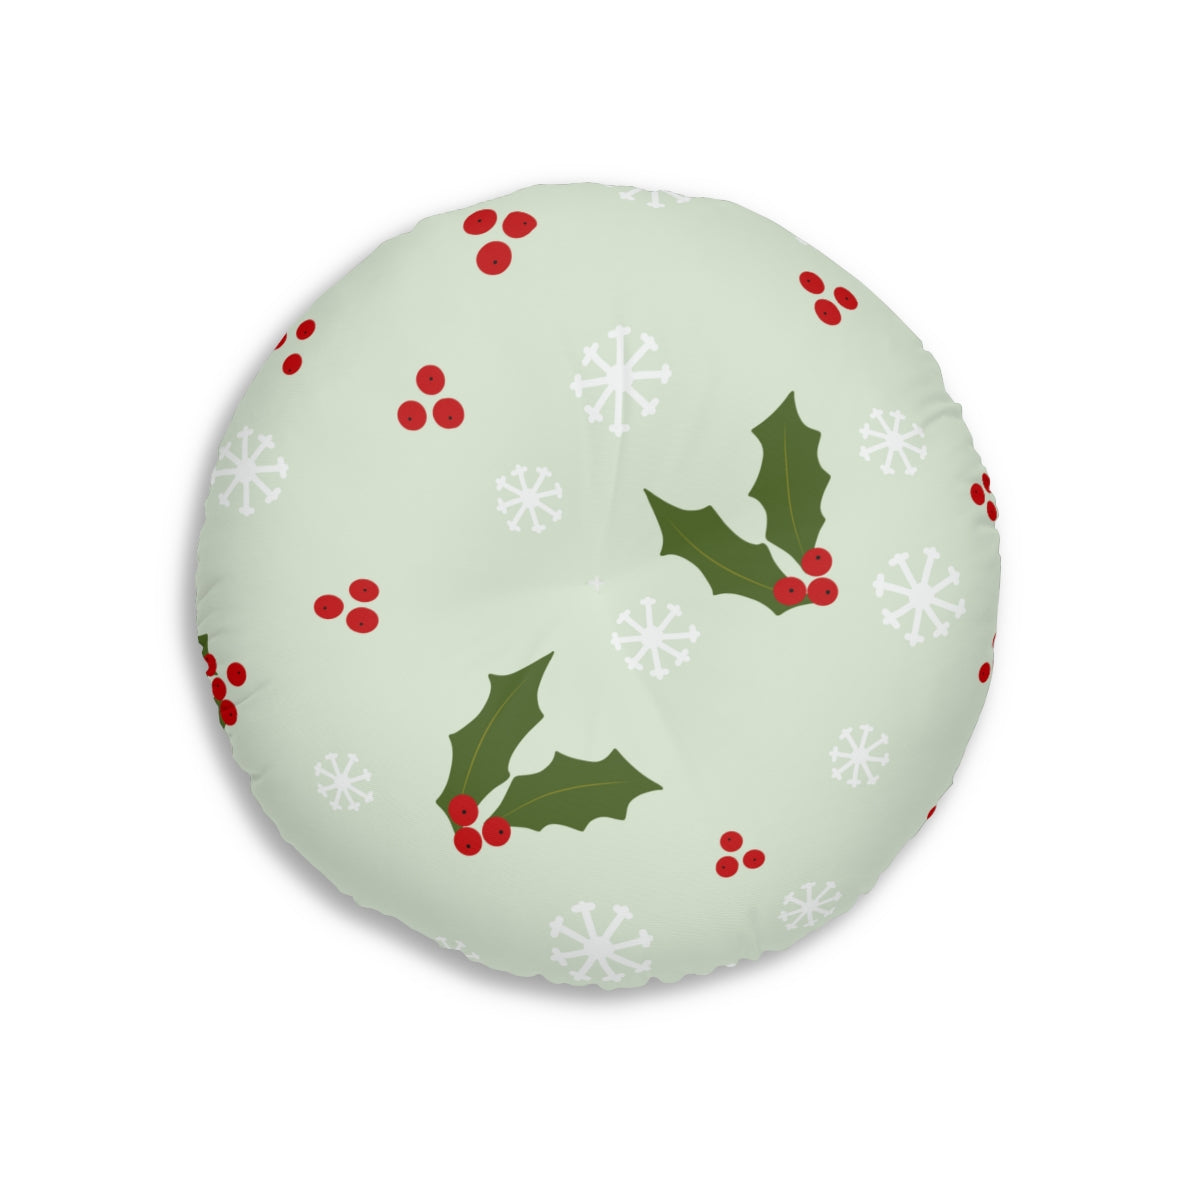 Lifestyle Details - Round Tufted Holiday Floor Pillow - Holly & Snowflakes - 26x26 - Front View